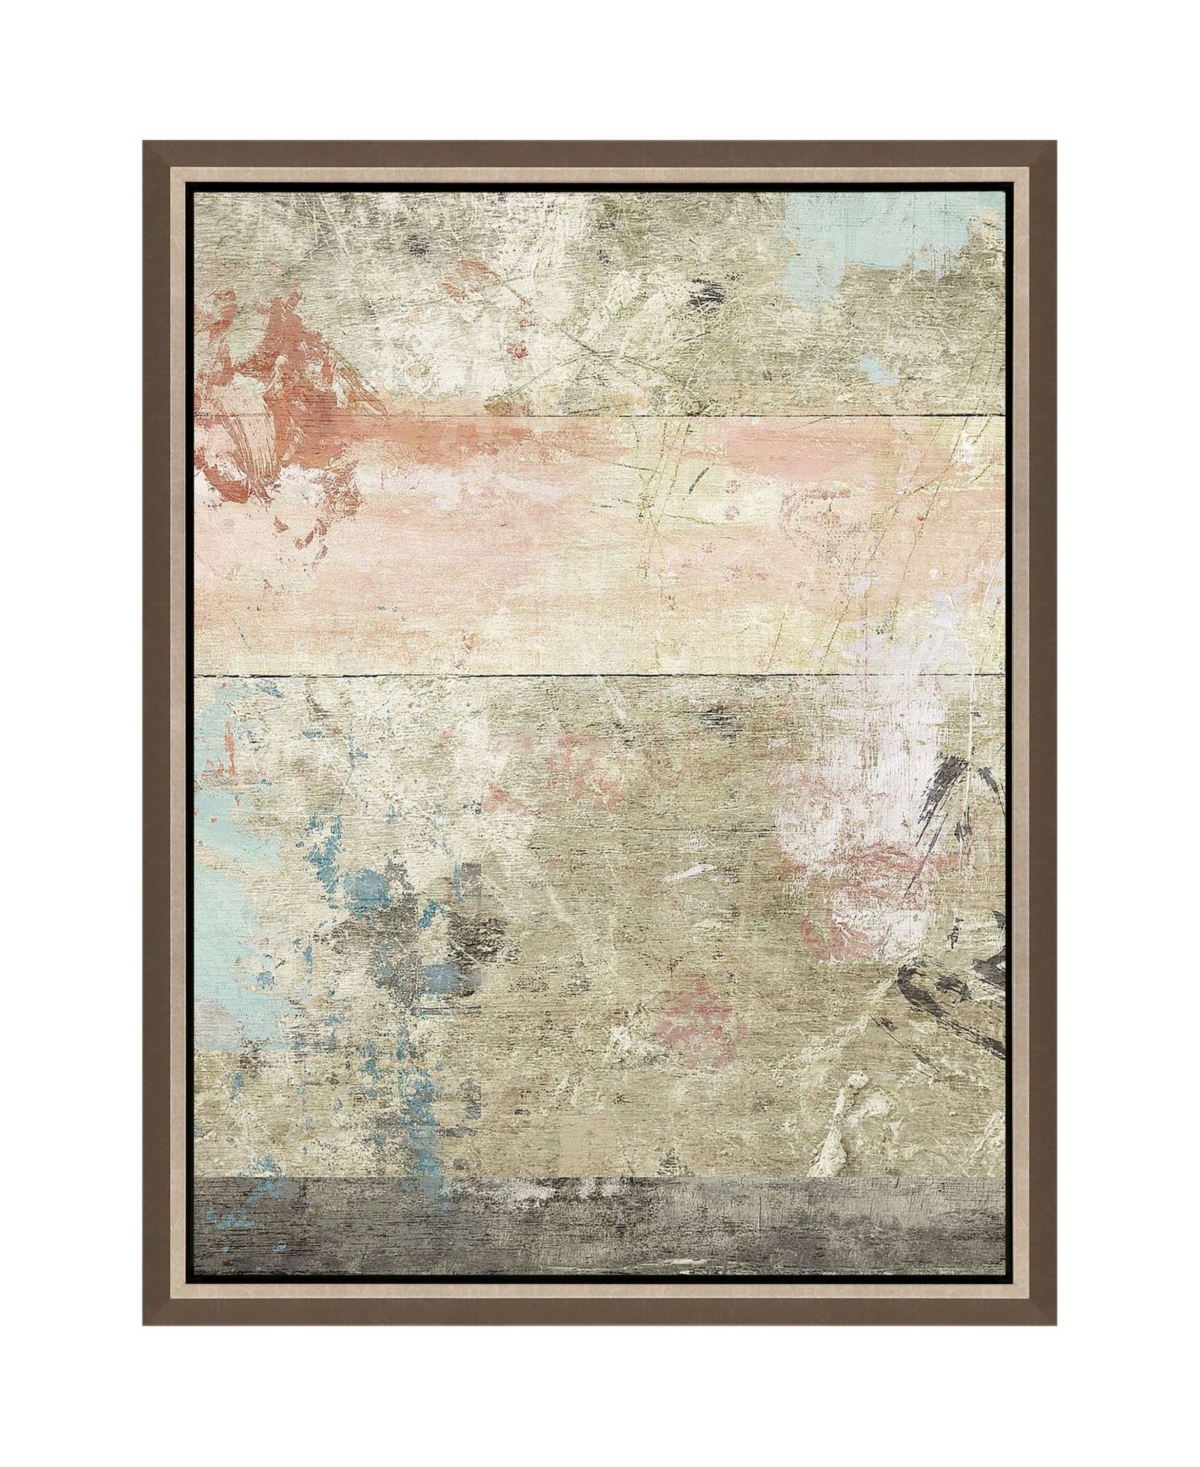 Paragon Picture Gallery Urban Decay No.2 Framed Art In Beige